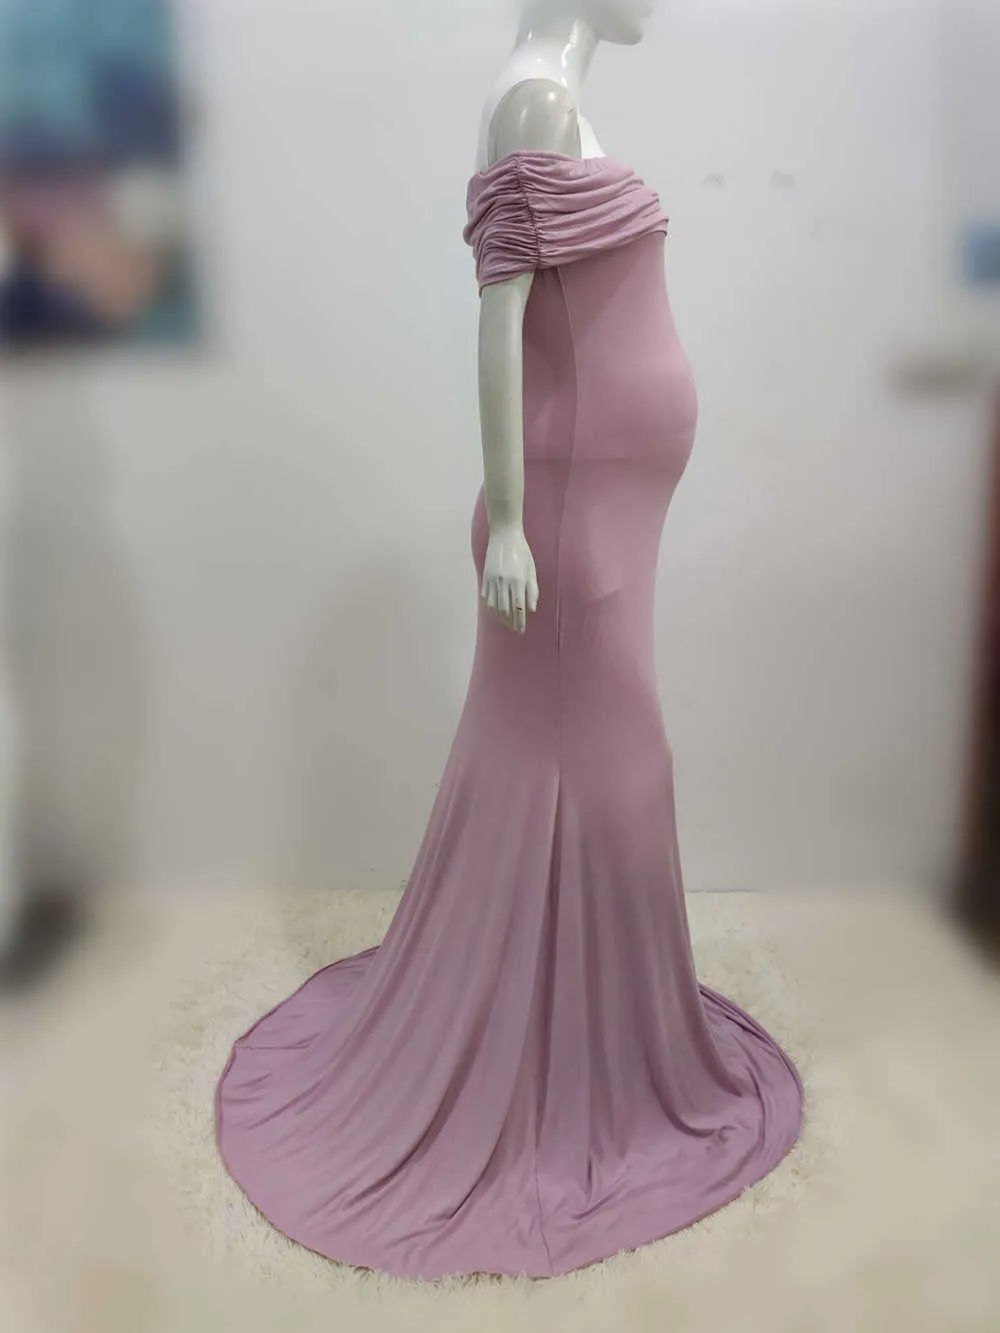 Shoulderless Maternity Dresses Photography Props Long Pregnancy Dress For Baby Shower Photo Shoots Pregnant Women Maxi Gown 2020 (5)